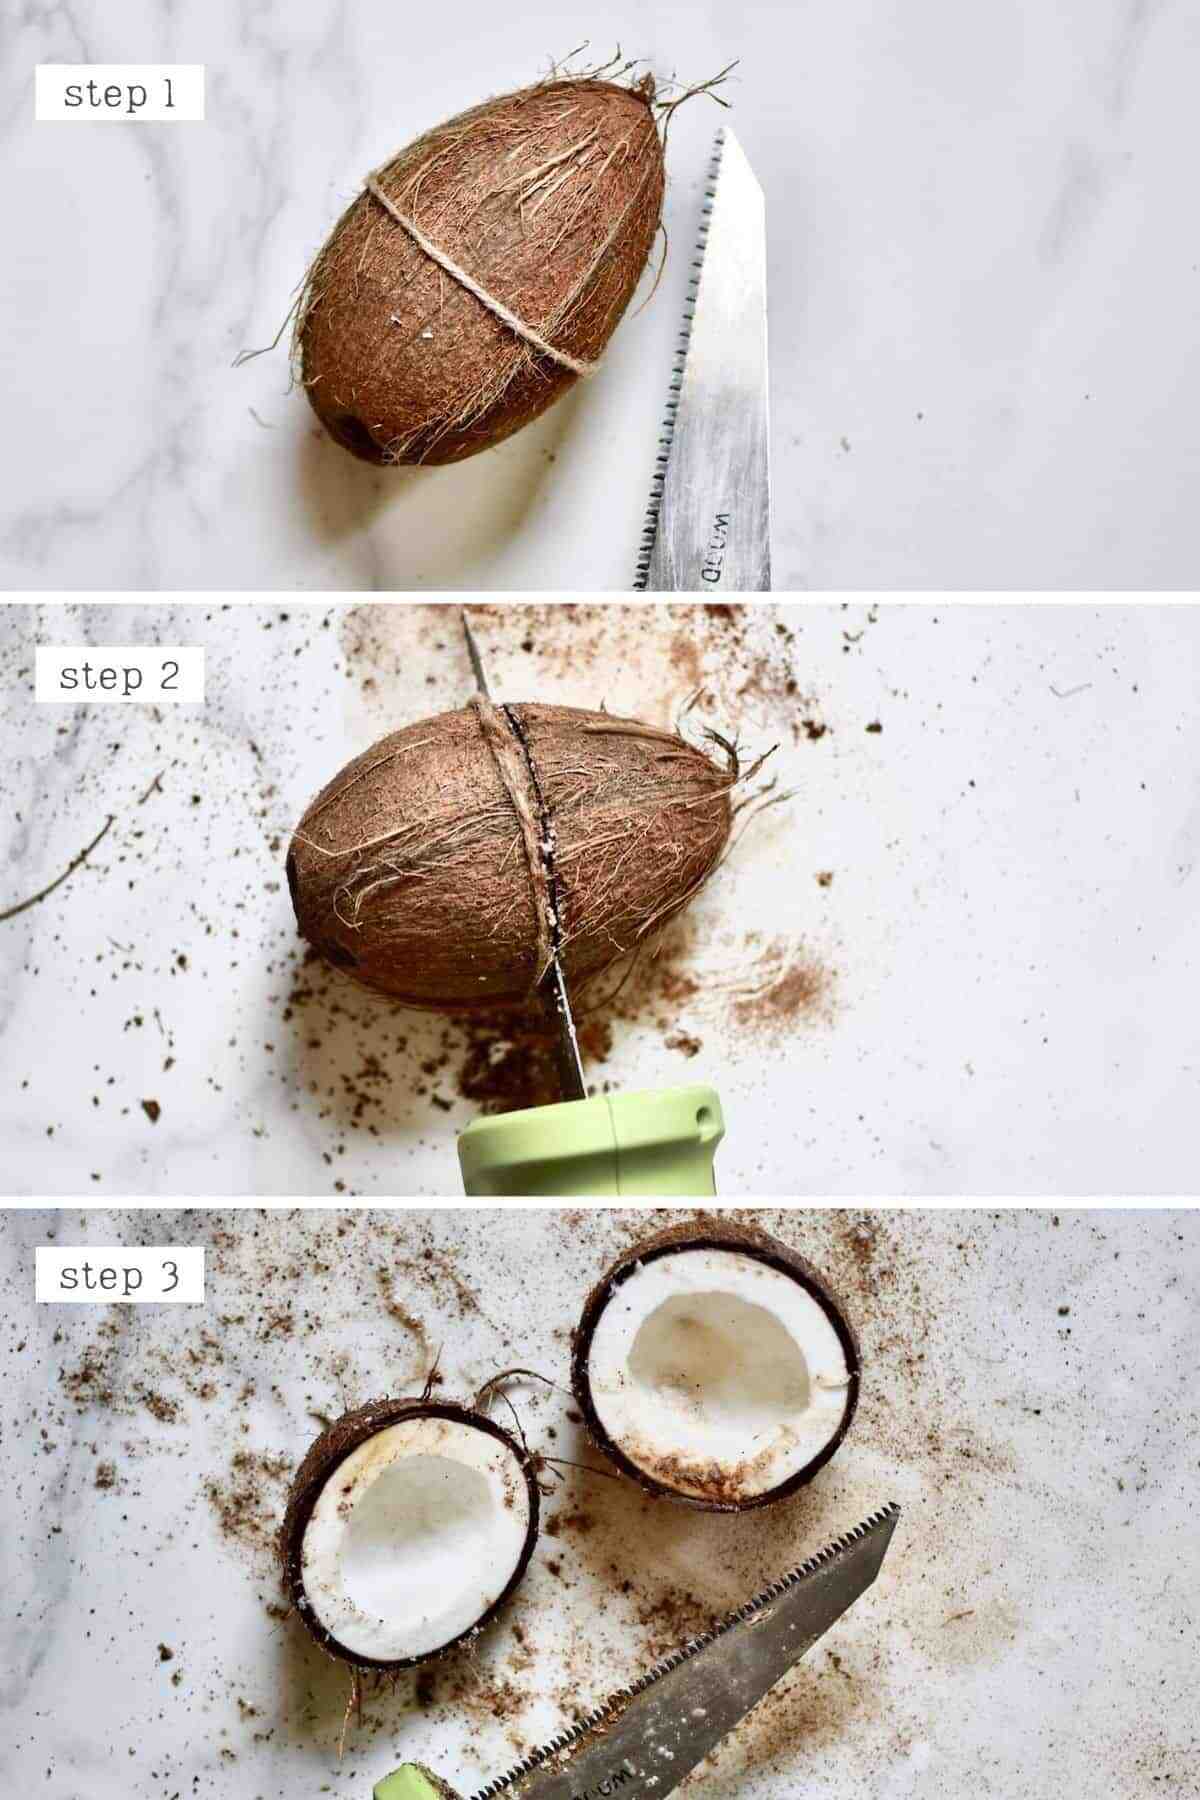 What is the easiest way to open a coconut shell?